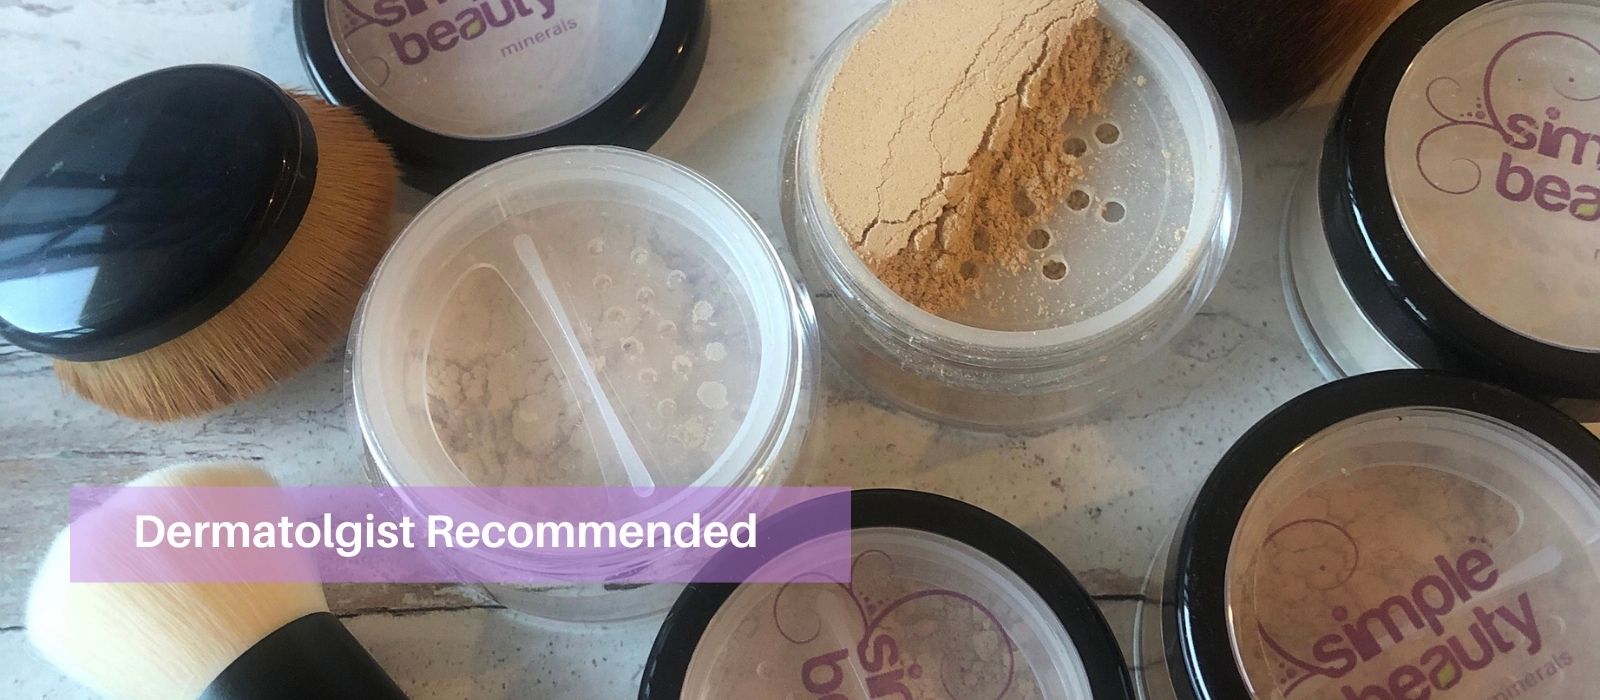 foundations mineral pots dermatologist recommended